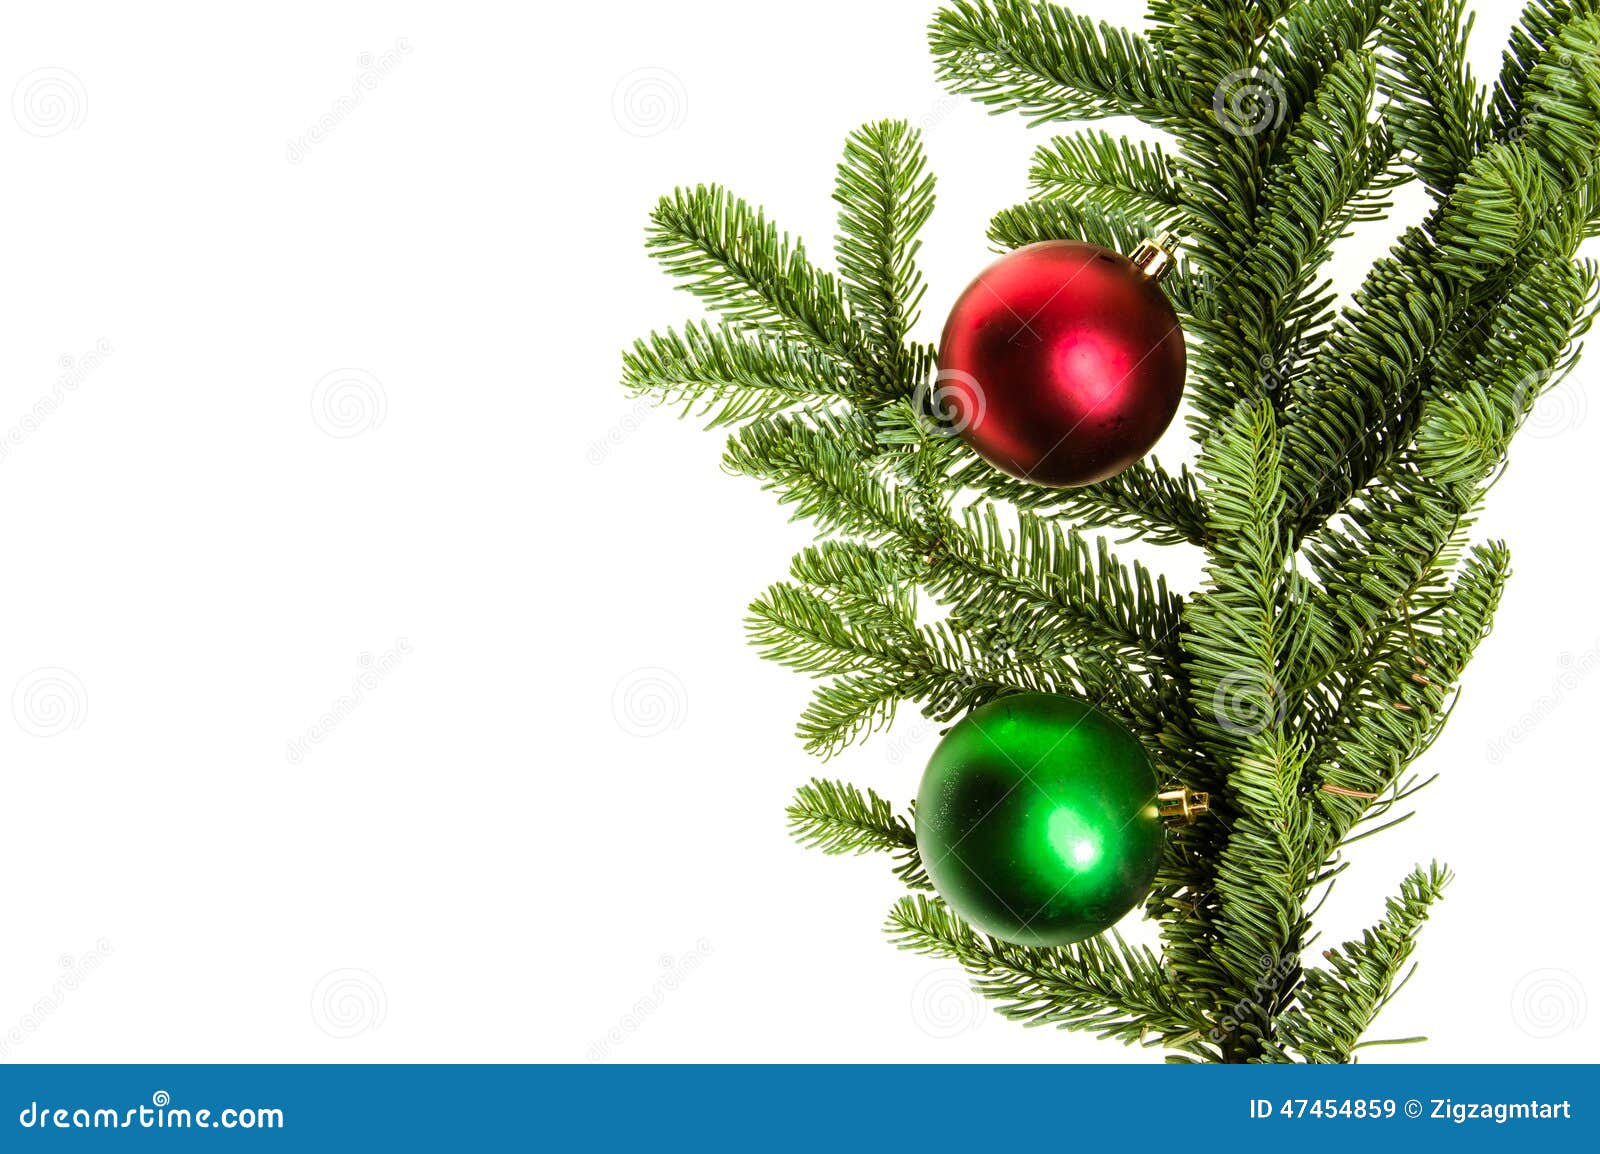 Noble fir bough with red and green ornaments